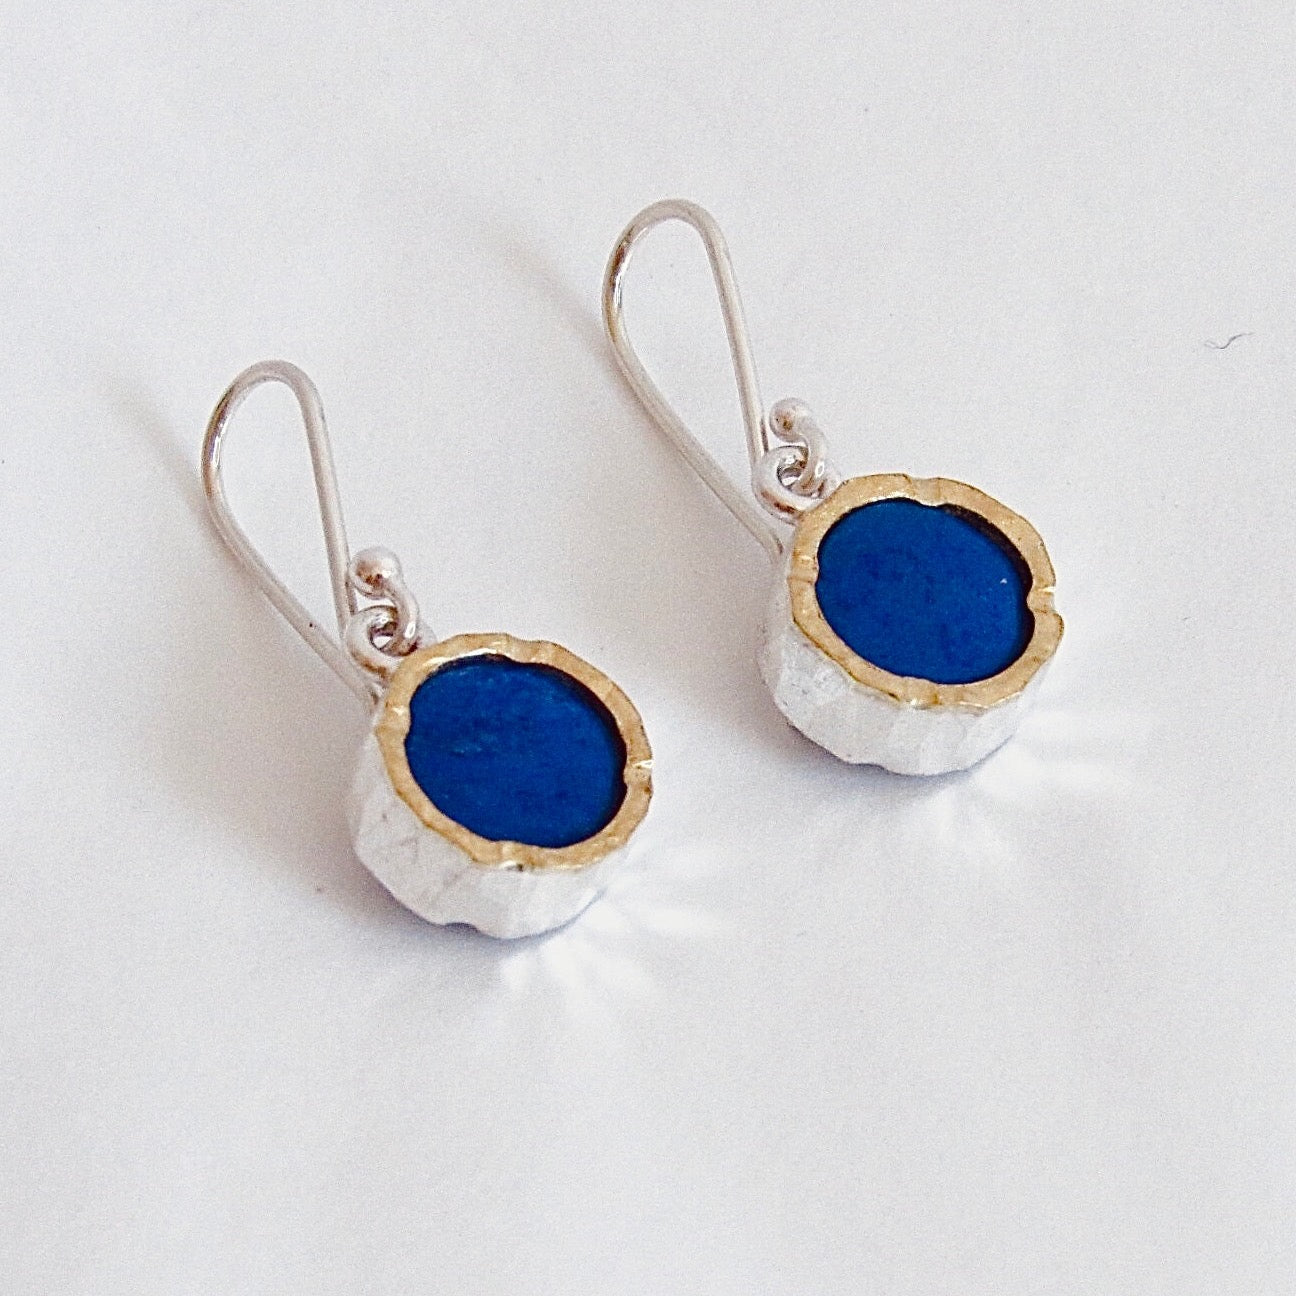 Silver and gold earrings with a blue centre